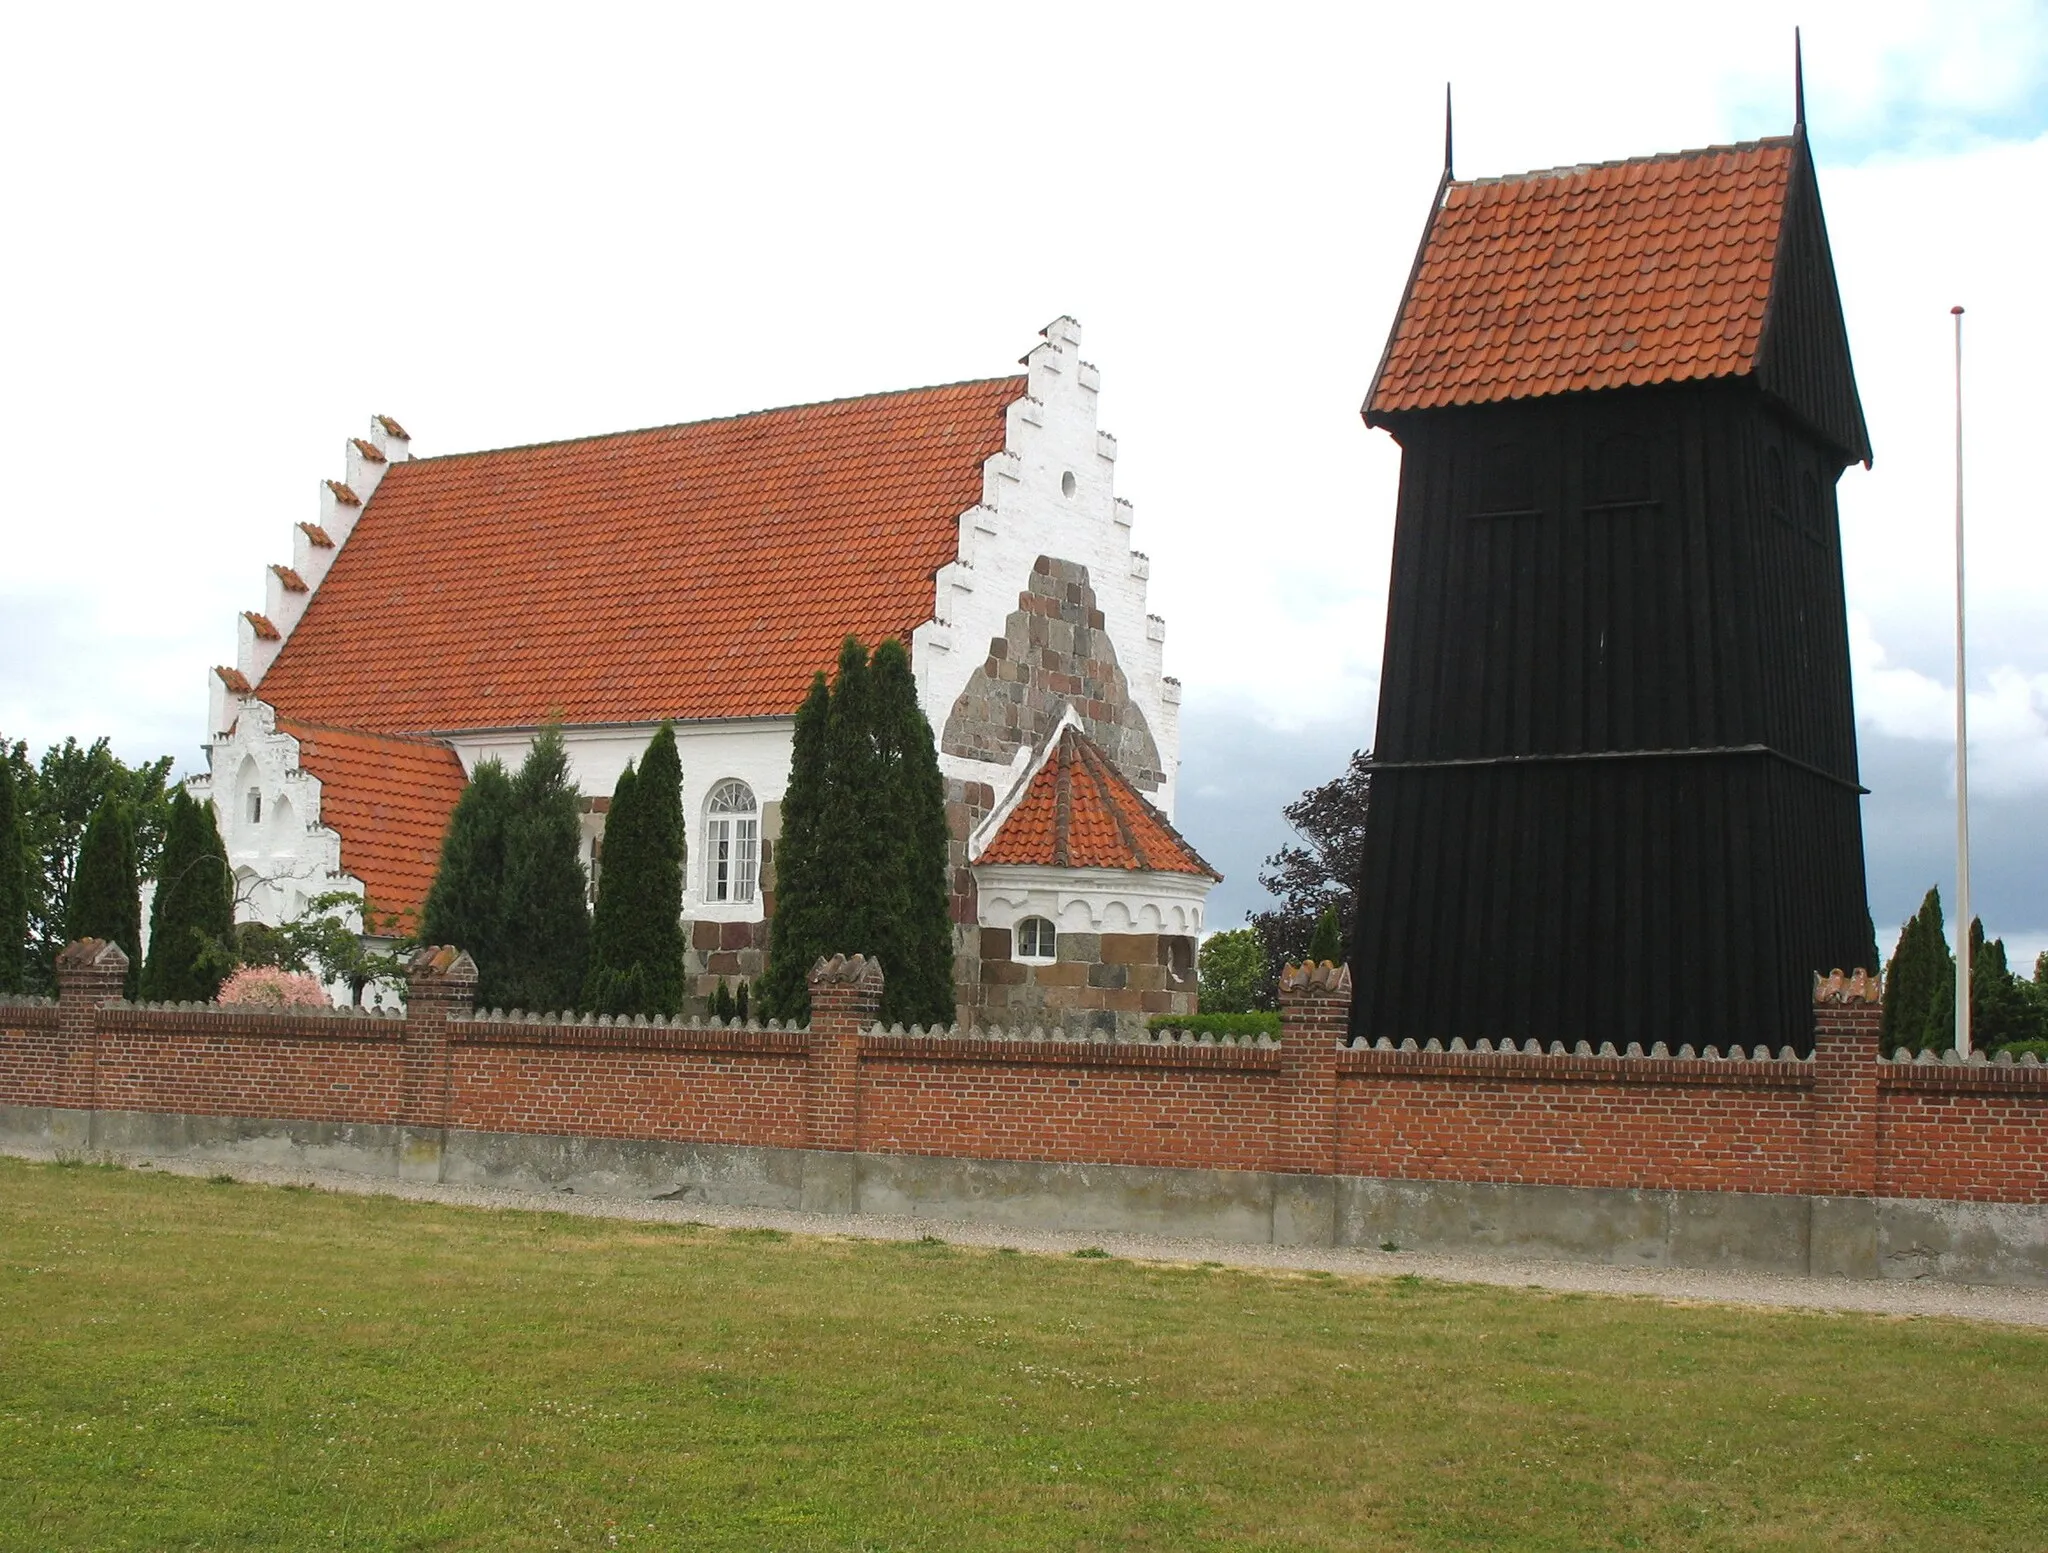 Photo showing: The church "Søllested Kirke" in the small town "Søllested". The town is located on the island Lolland in east Denmark.